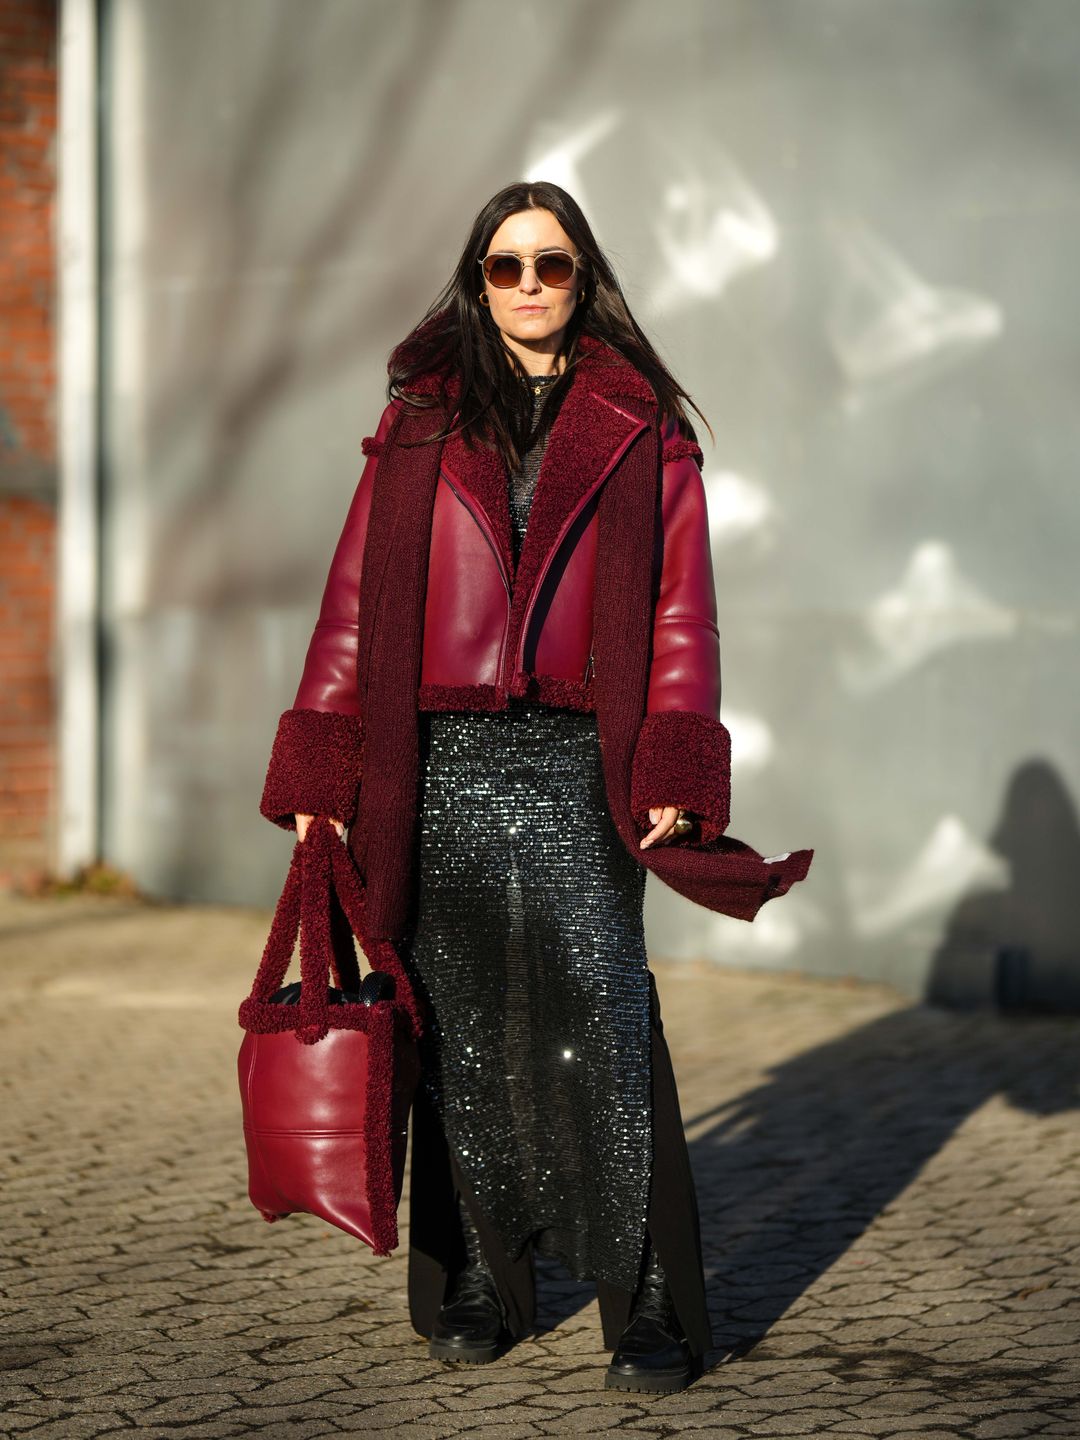 Woman wearing sheer glittery dress with red shearling jacket 